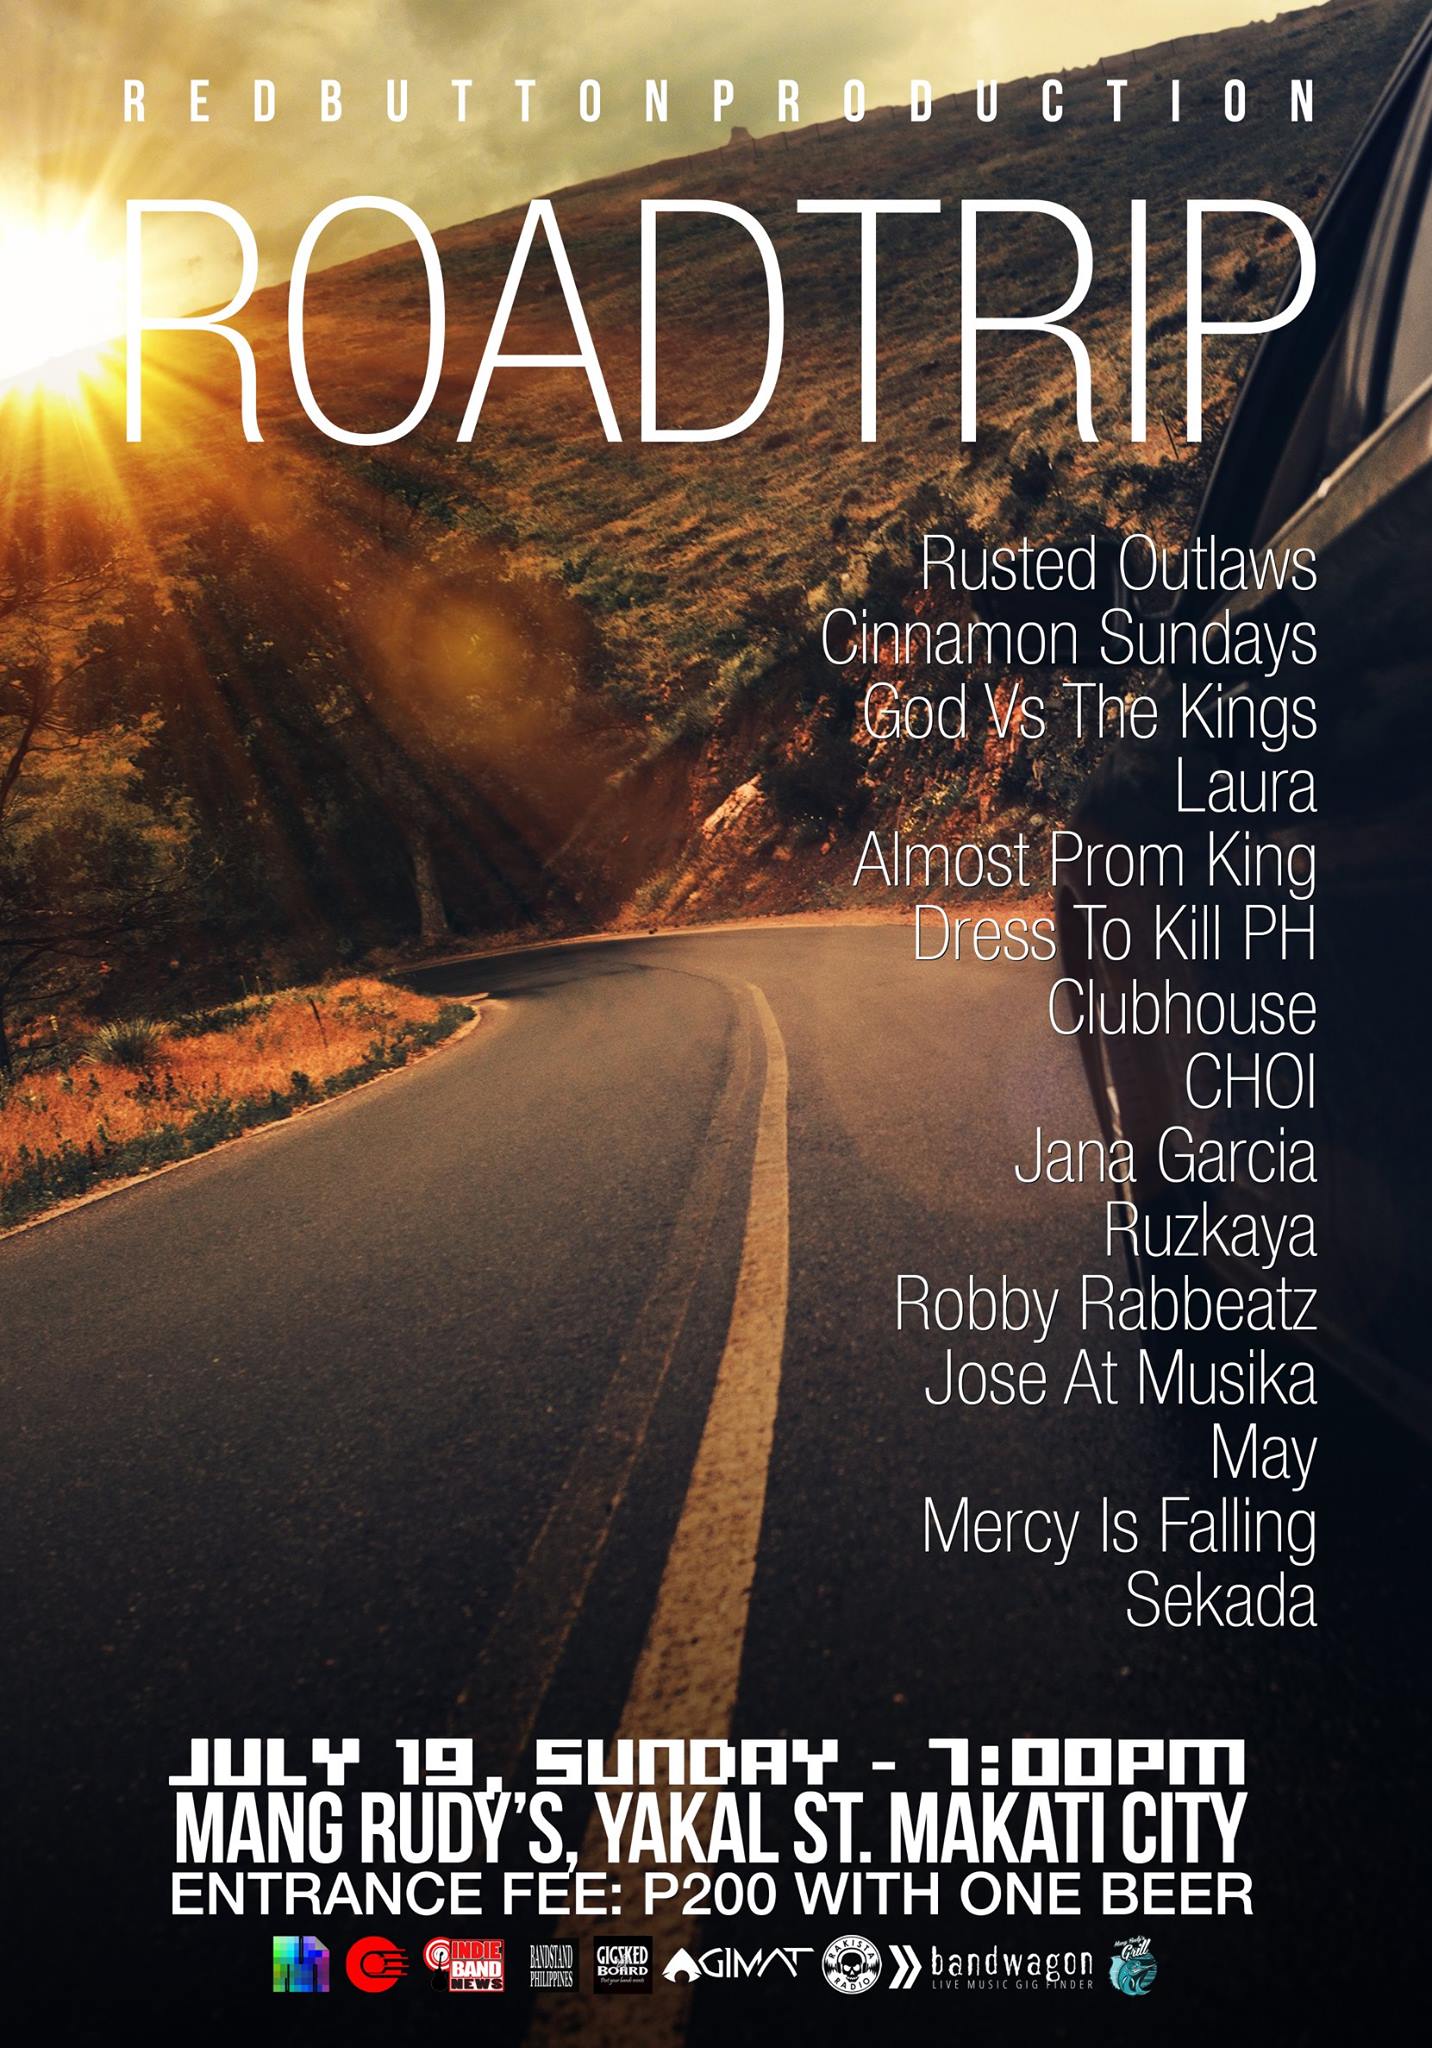 Red Button Production "ROADTRIP" July 19, Sunday | 7:00PM Venue: MANG RUDY'S, Yakal St., Makati City Entrance Fee: P200 with 1 BEER performances by: Rusted Outlaws Cinnamon Sundays God Vs The Kings Laura Almost Prom King Dress To Kill PH Clubhouse CHOI Jana Garcia Ruzkaya Robby Rabbeatz Jose At Musika May Mercy Is Falling Sekada